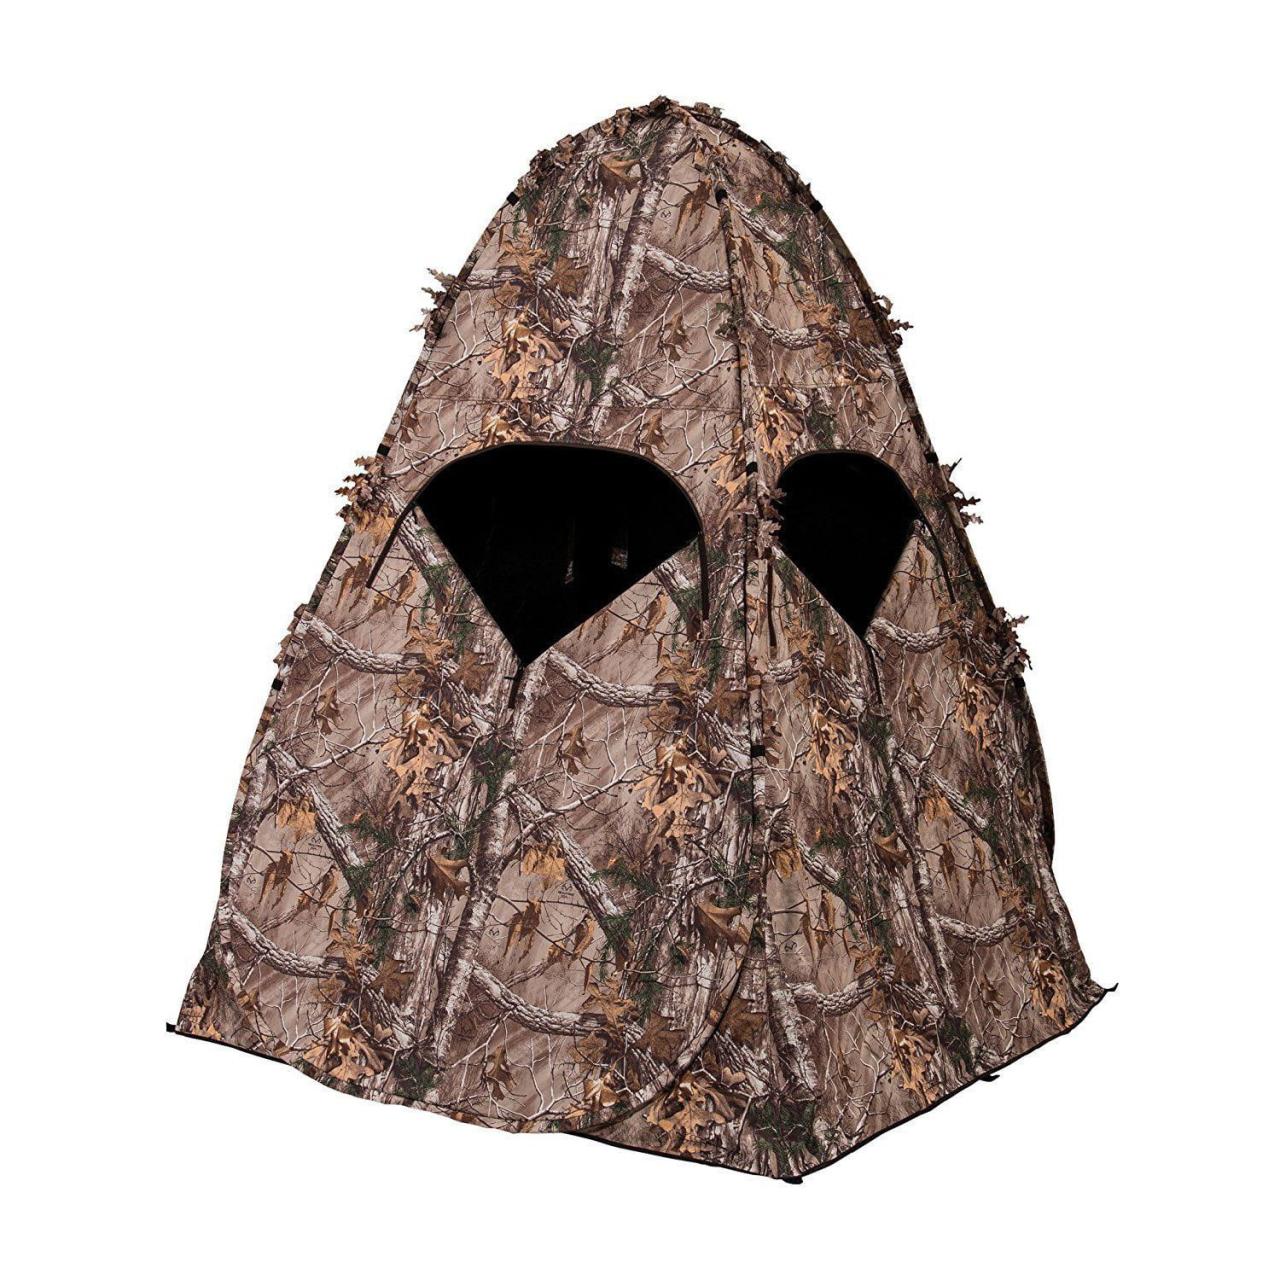 Deer portable hunting pop blind ground mesh proof camo hunter weather window available